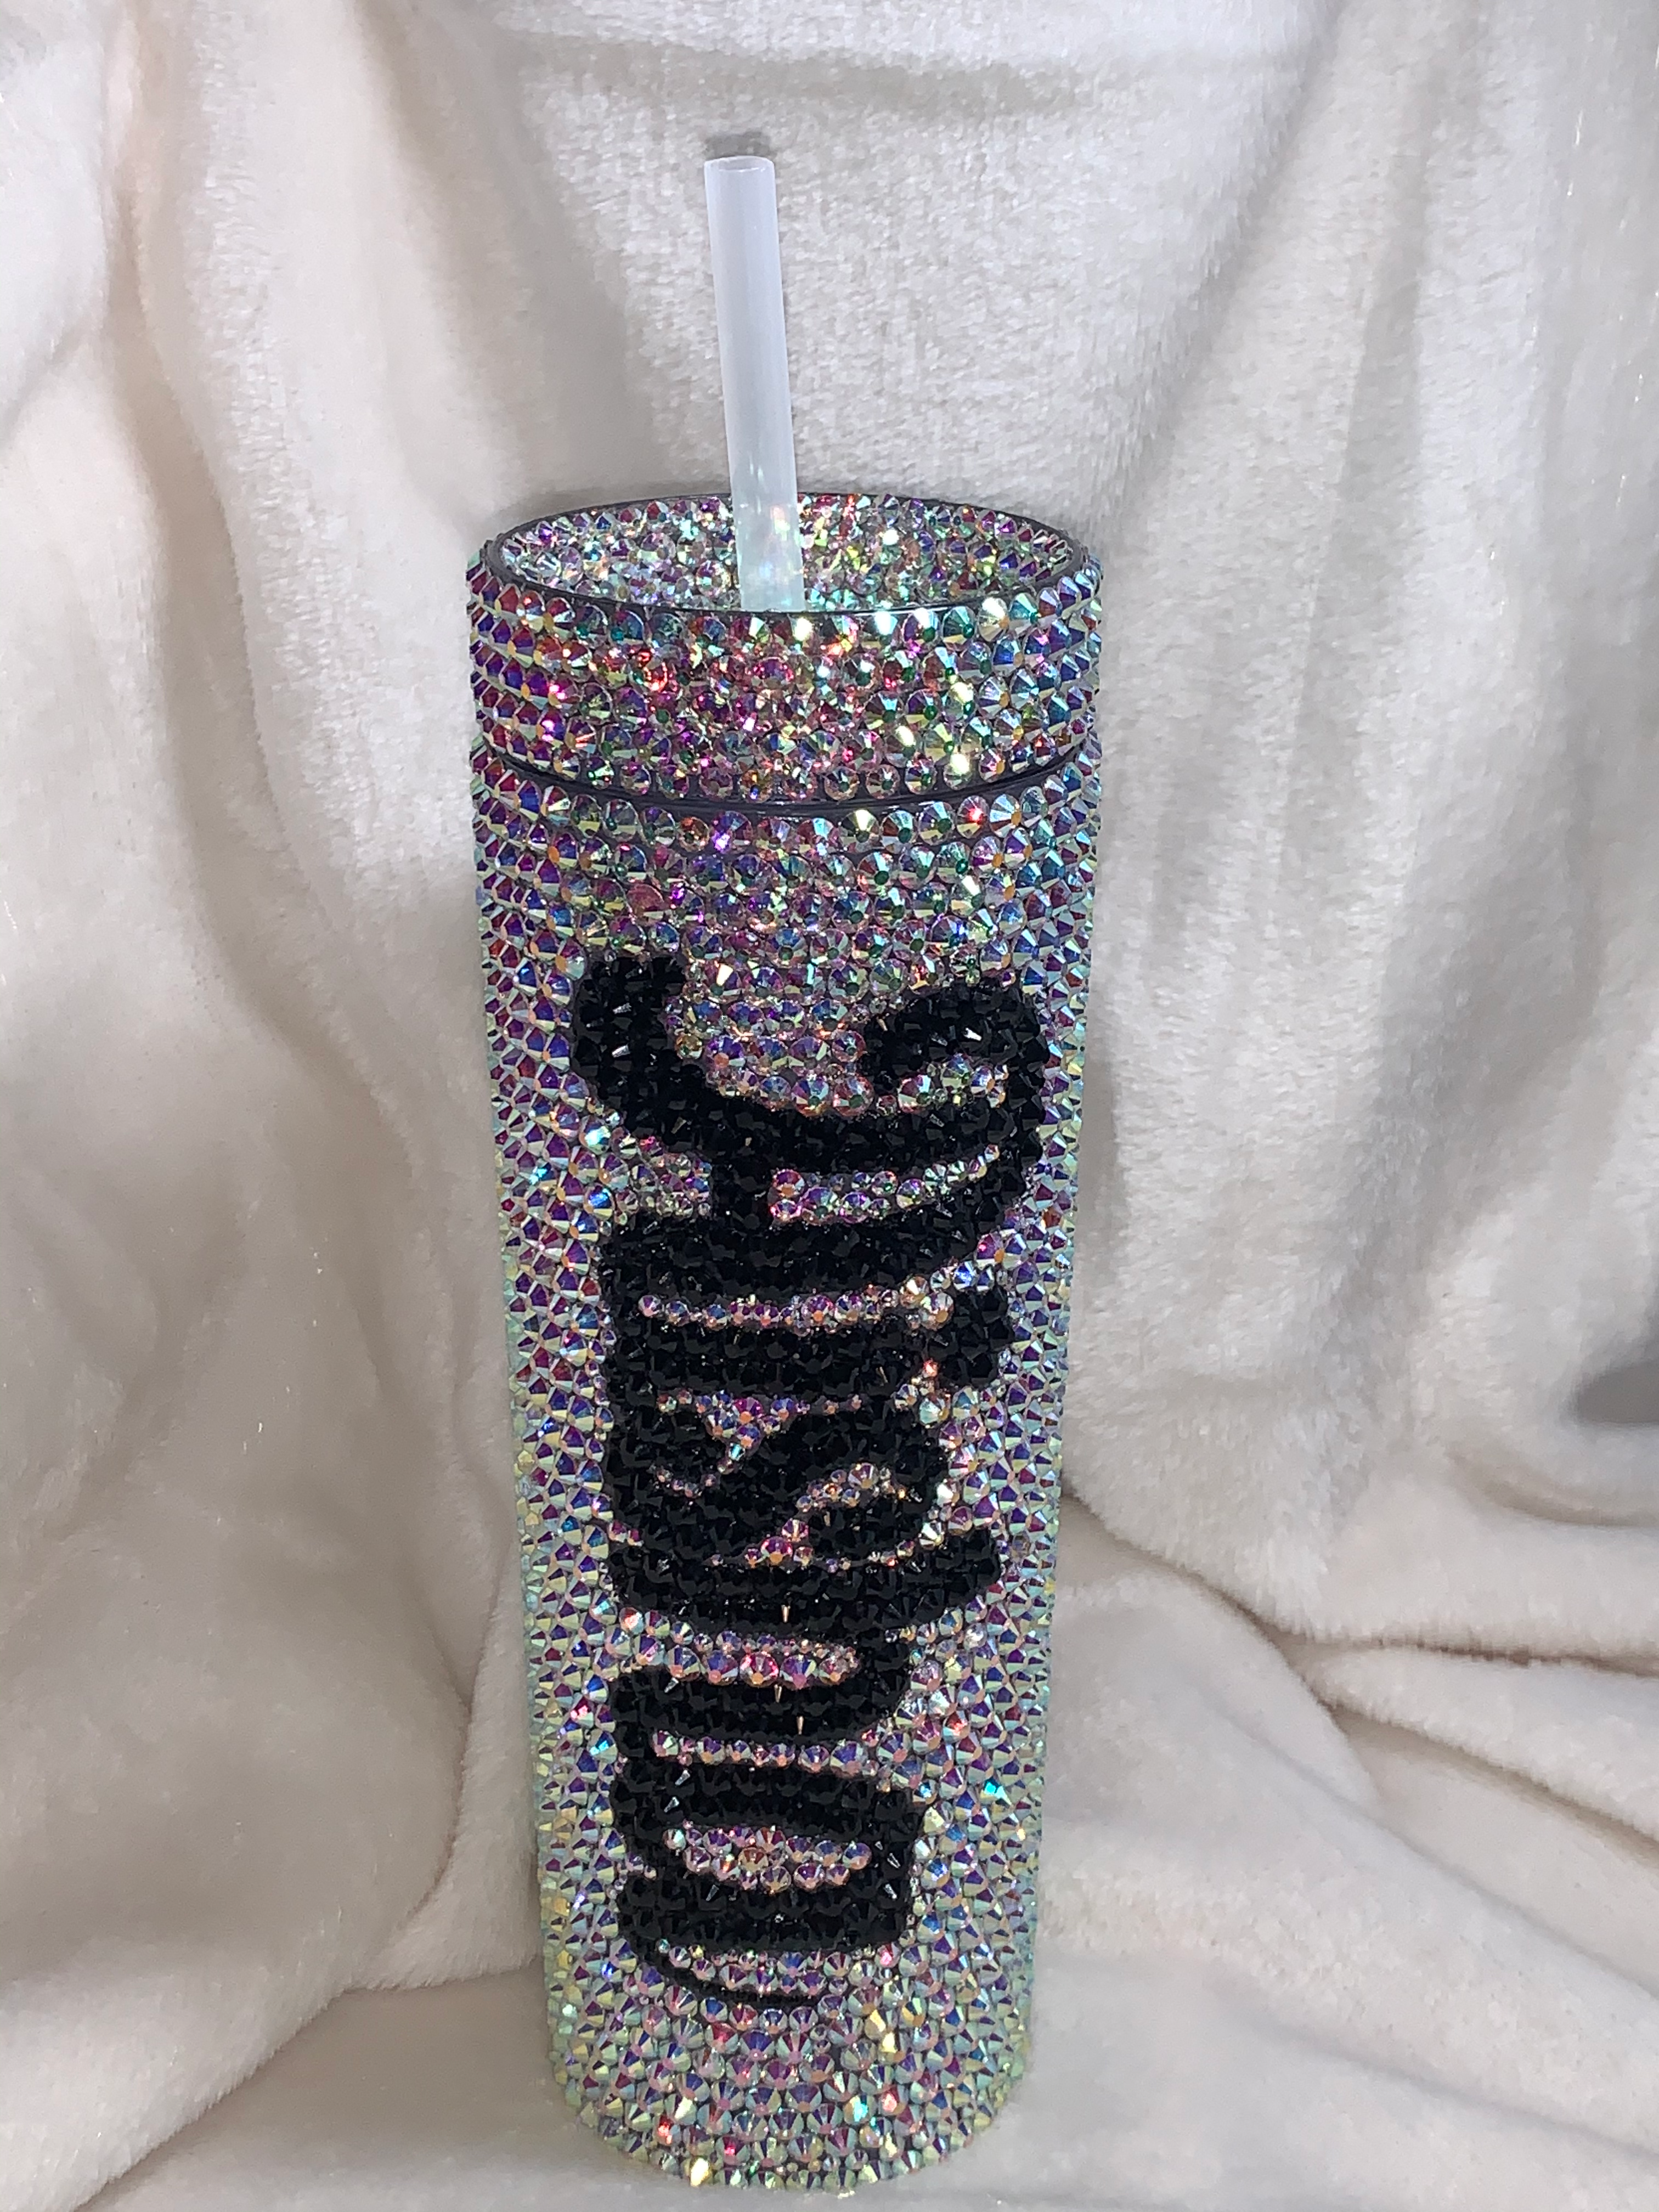 Customised bling coffee cups - Slaylebrity